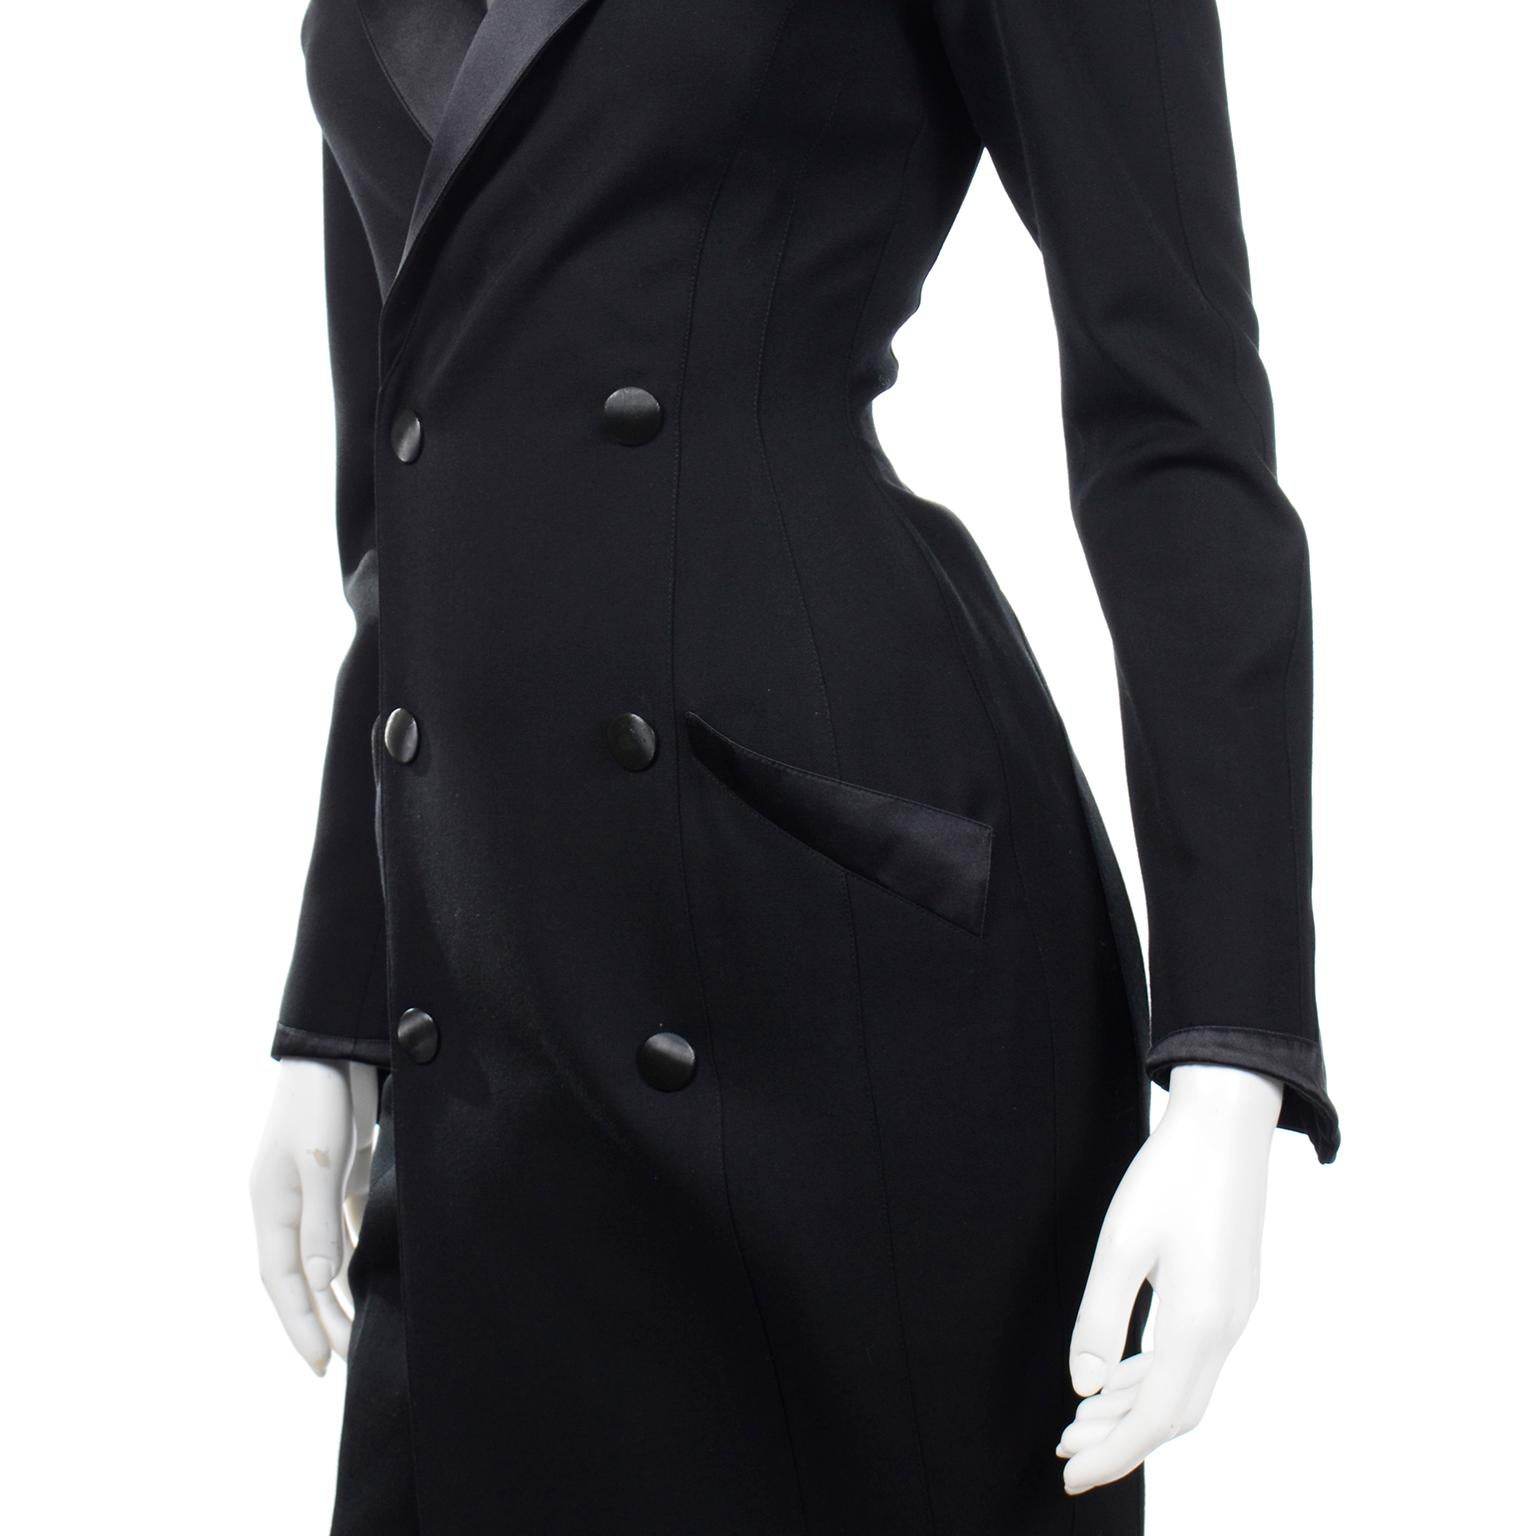 Vintage Thierry Mugler Black Evening Dress or Evening Coat With Pop Up Collar 1